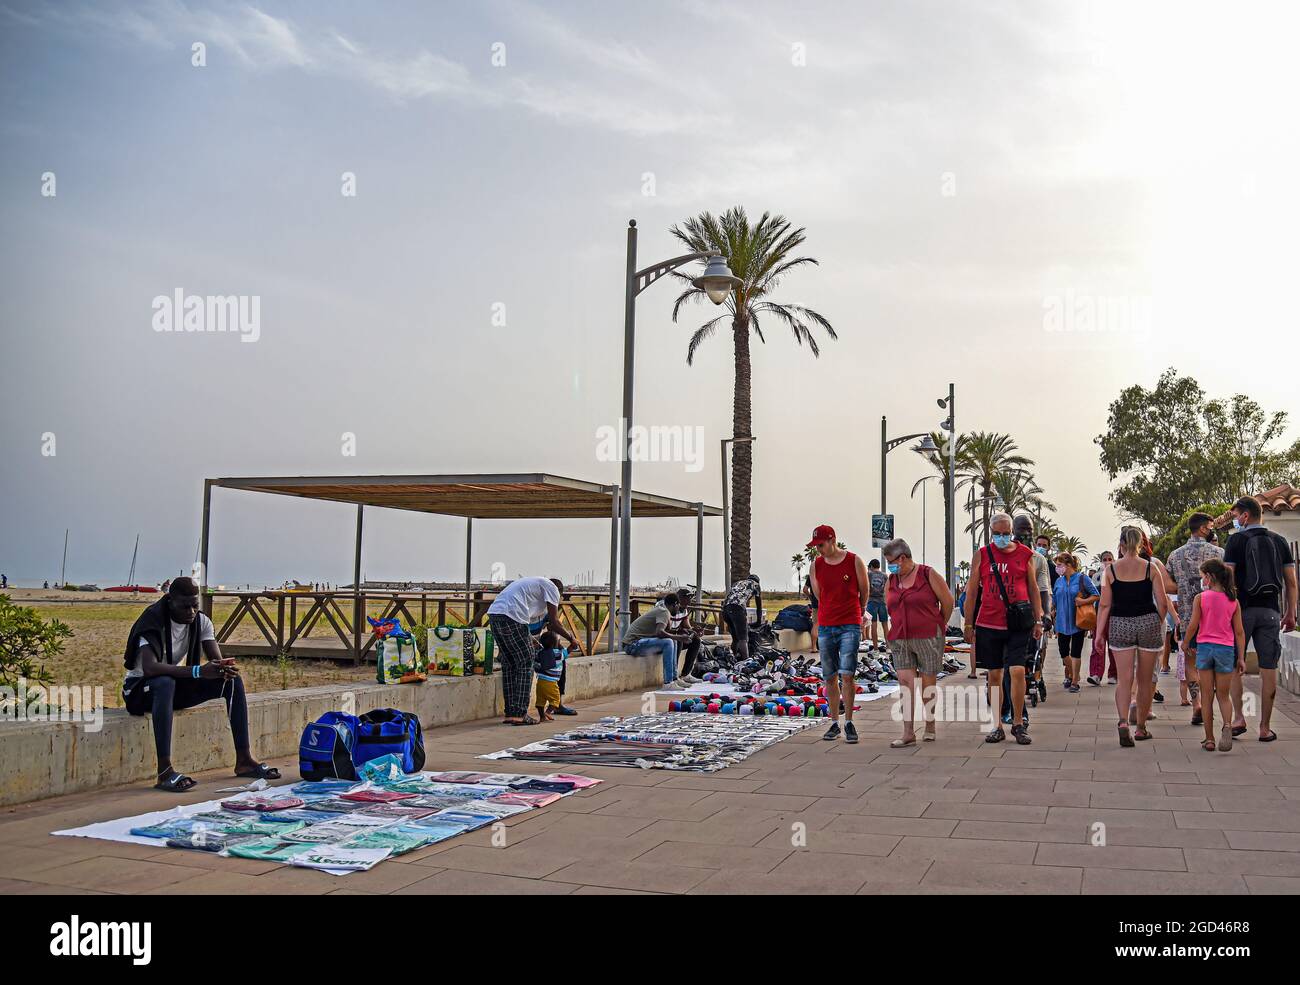 Vruchtbaar Krijt Noord Amerika People walk in front of the stalls with blankets on the ground covered with  illegal products along Paseo Maritimo Street in Vendrell. Illegal street  vendors known as "manteros" or "Top Manta", mostly